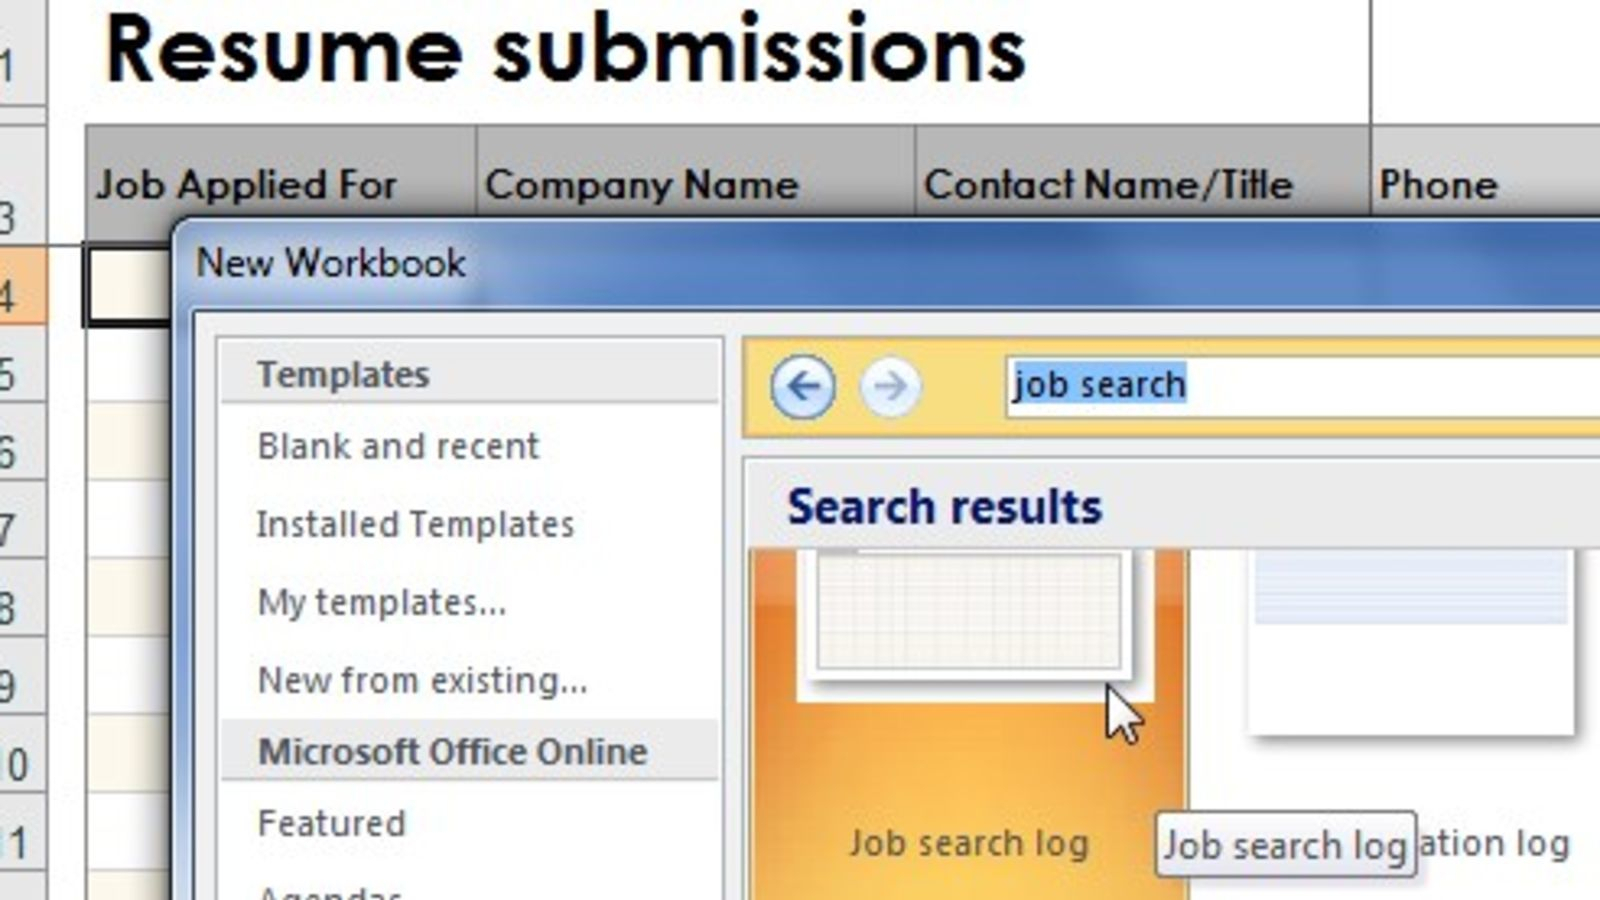 Job Search Tracking Spreadsheet With Create A Log To Keep Track Of Your Job Search